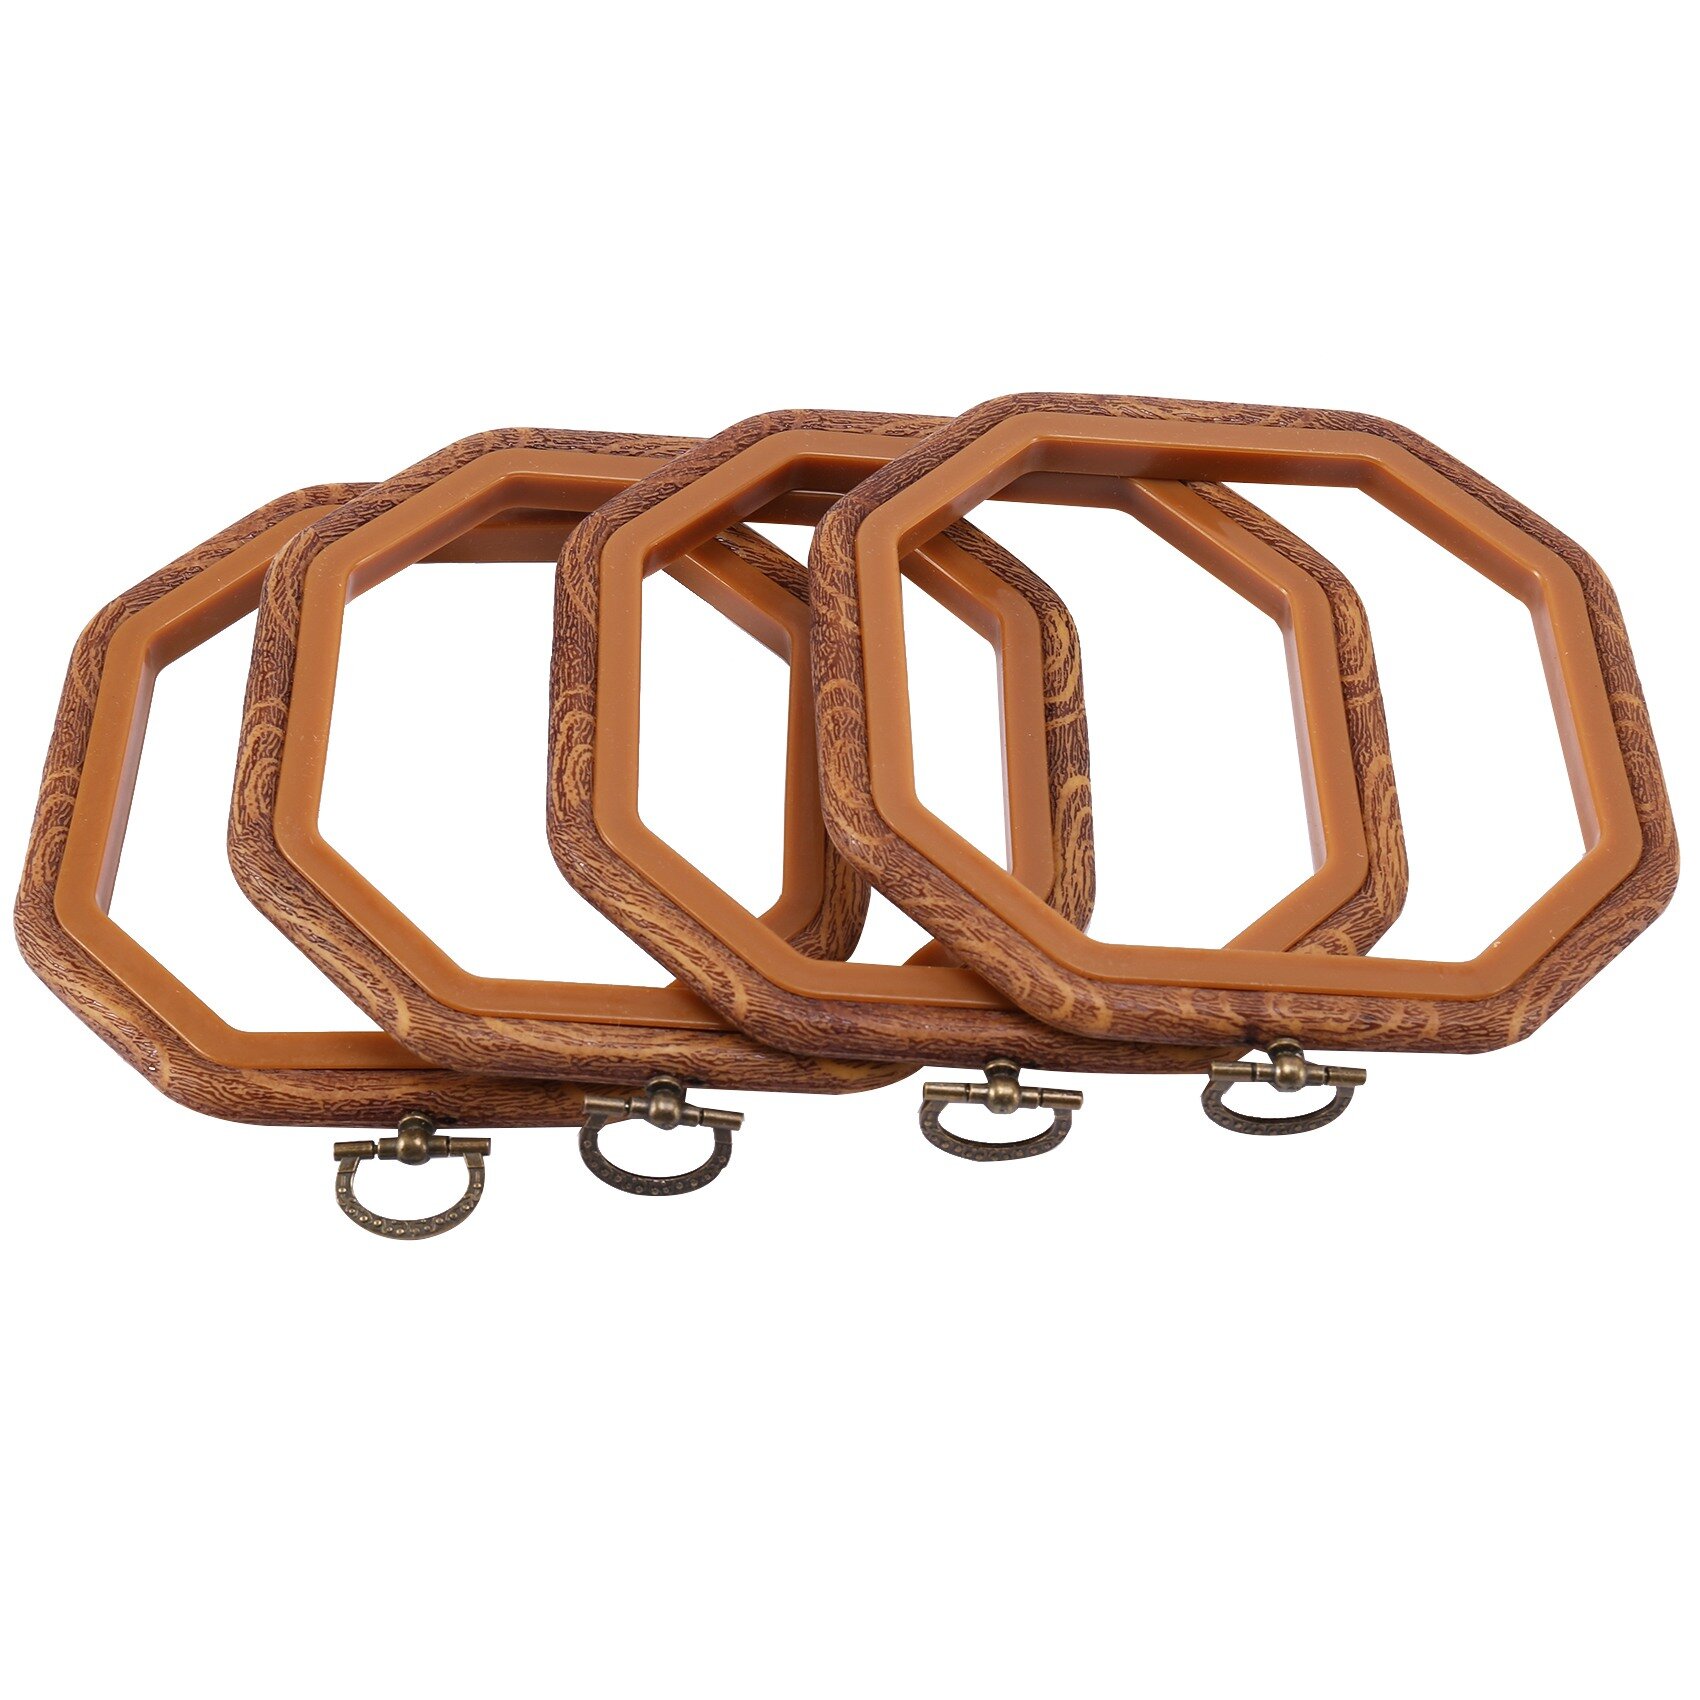 4PCS Octagon Embroidery Hoops Imitated Wood Hoop Set Display Frame for Art Craft Sewing and Hanging